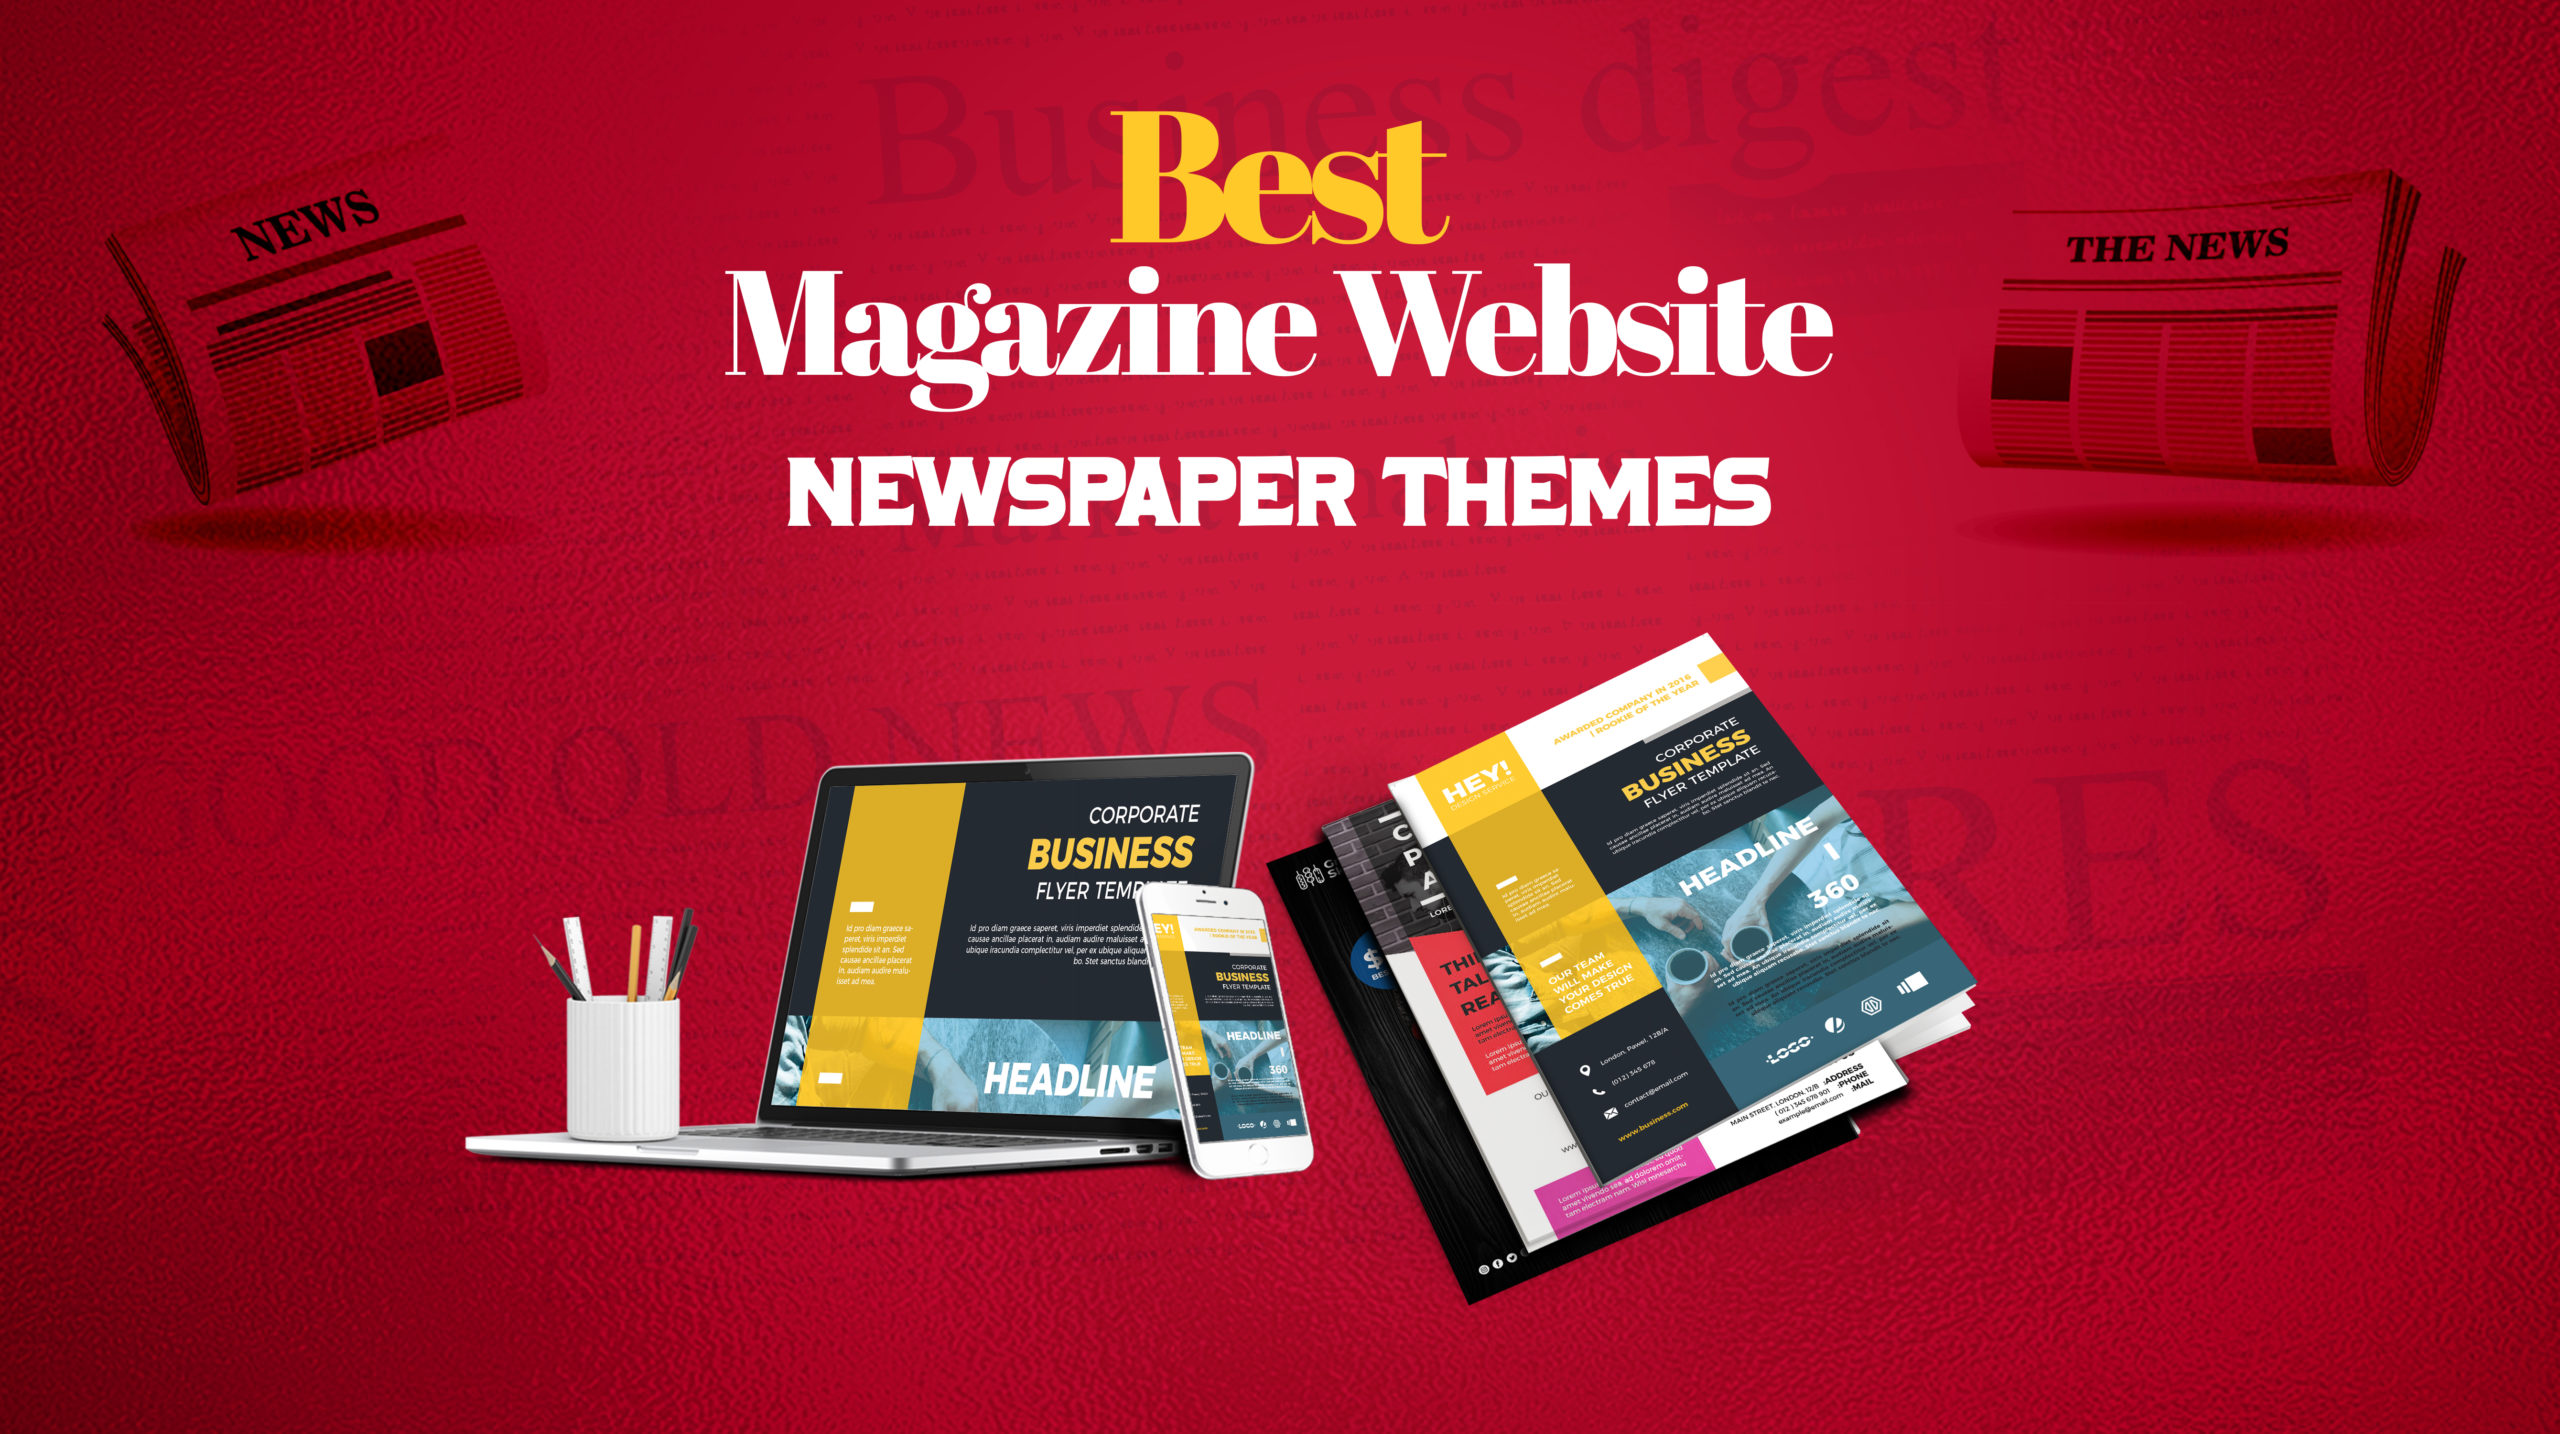 20 Best Magazine Website Templates and Newspaper Themes